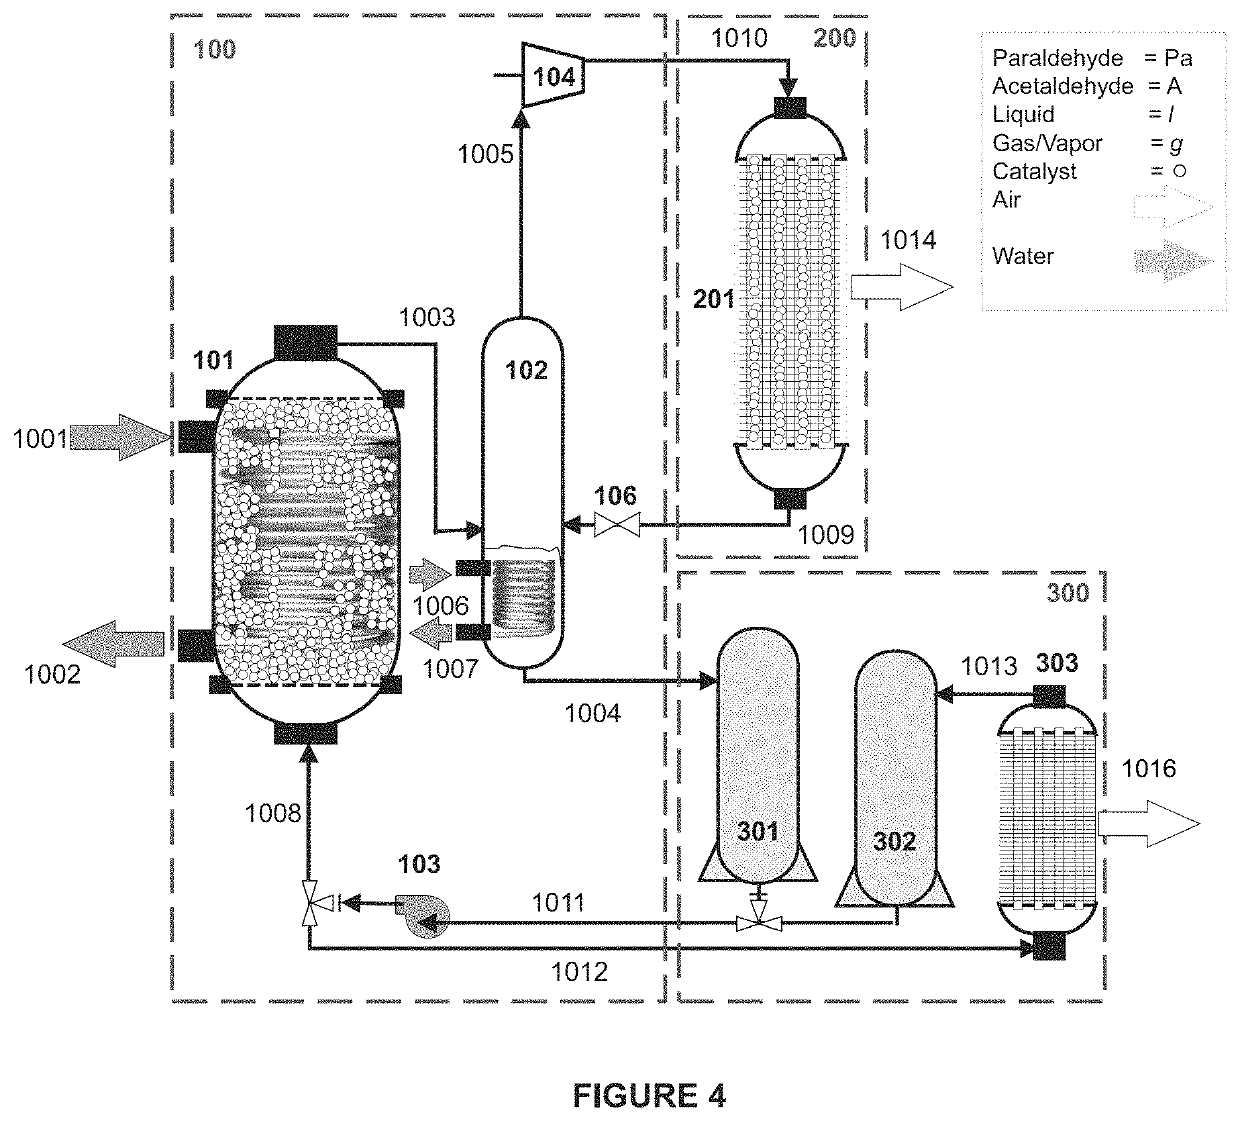 Dry cooling systems using thermally induced polymerization